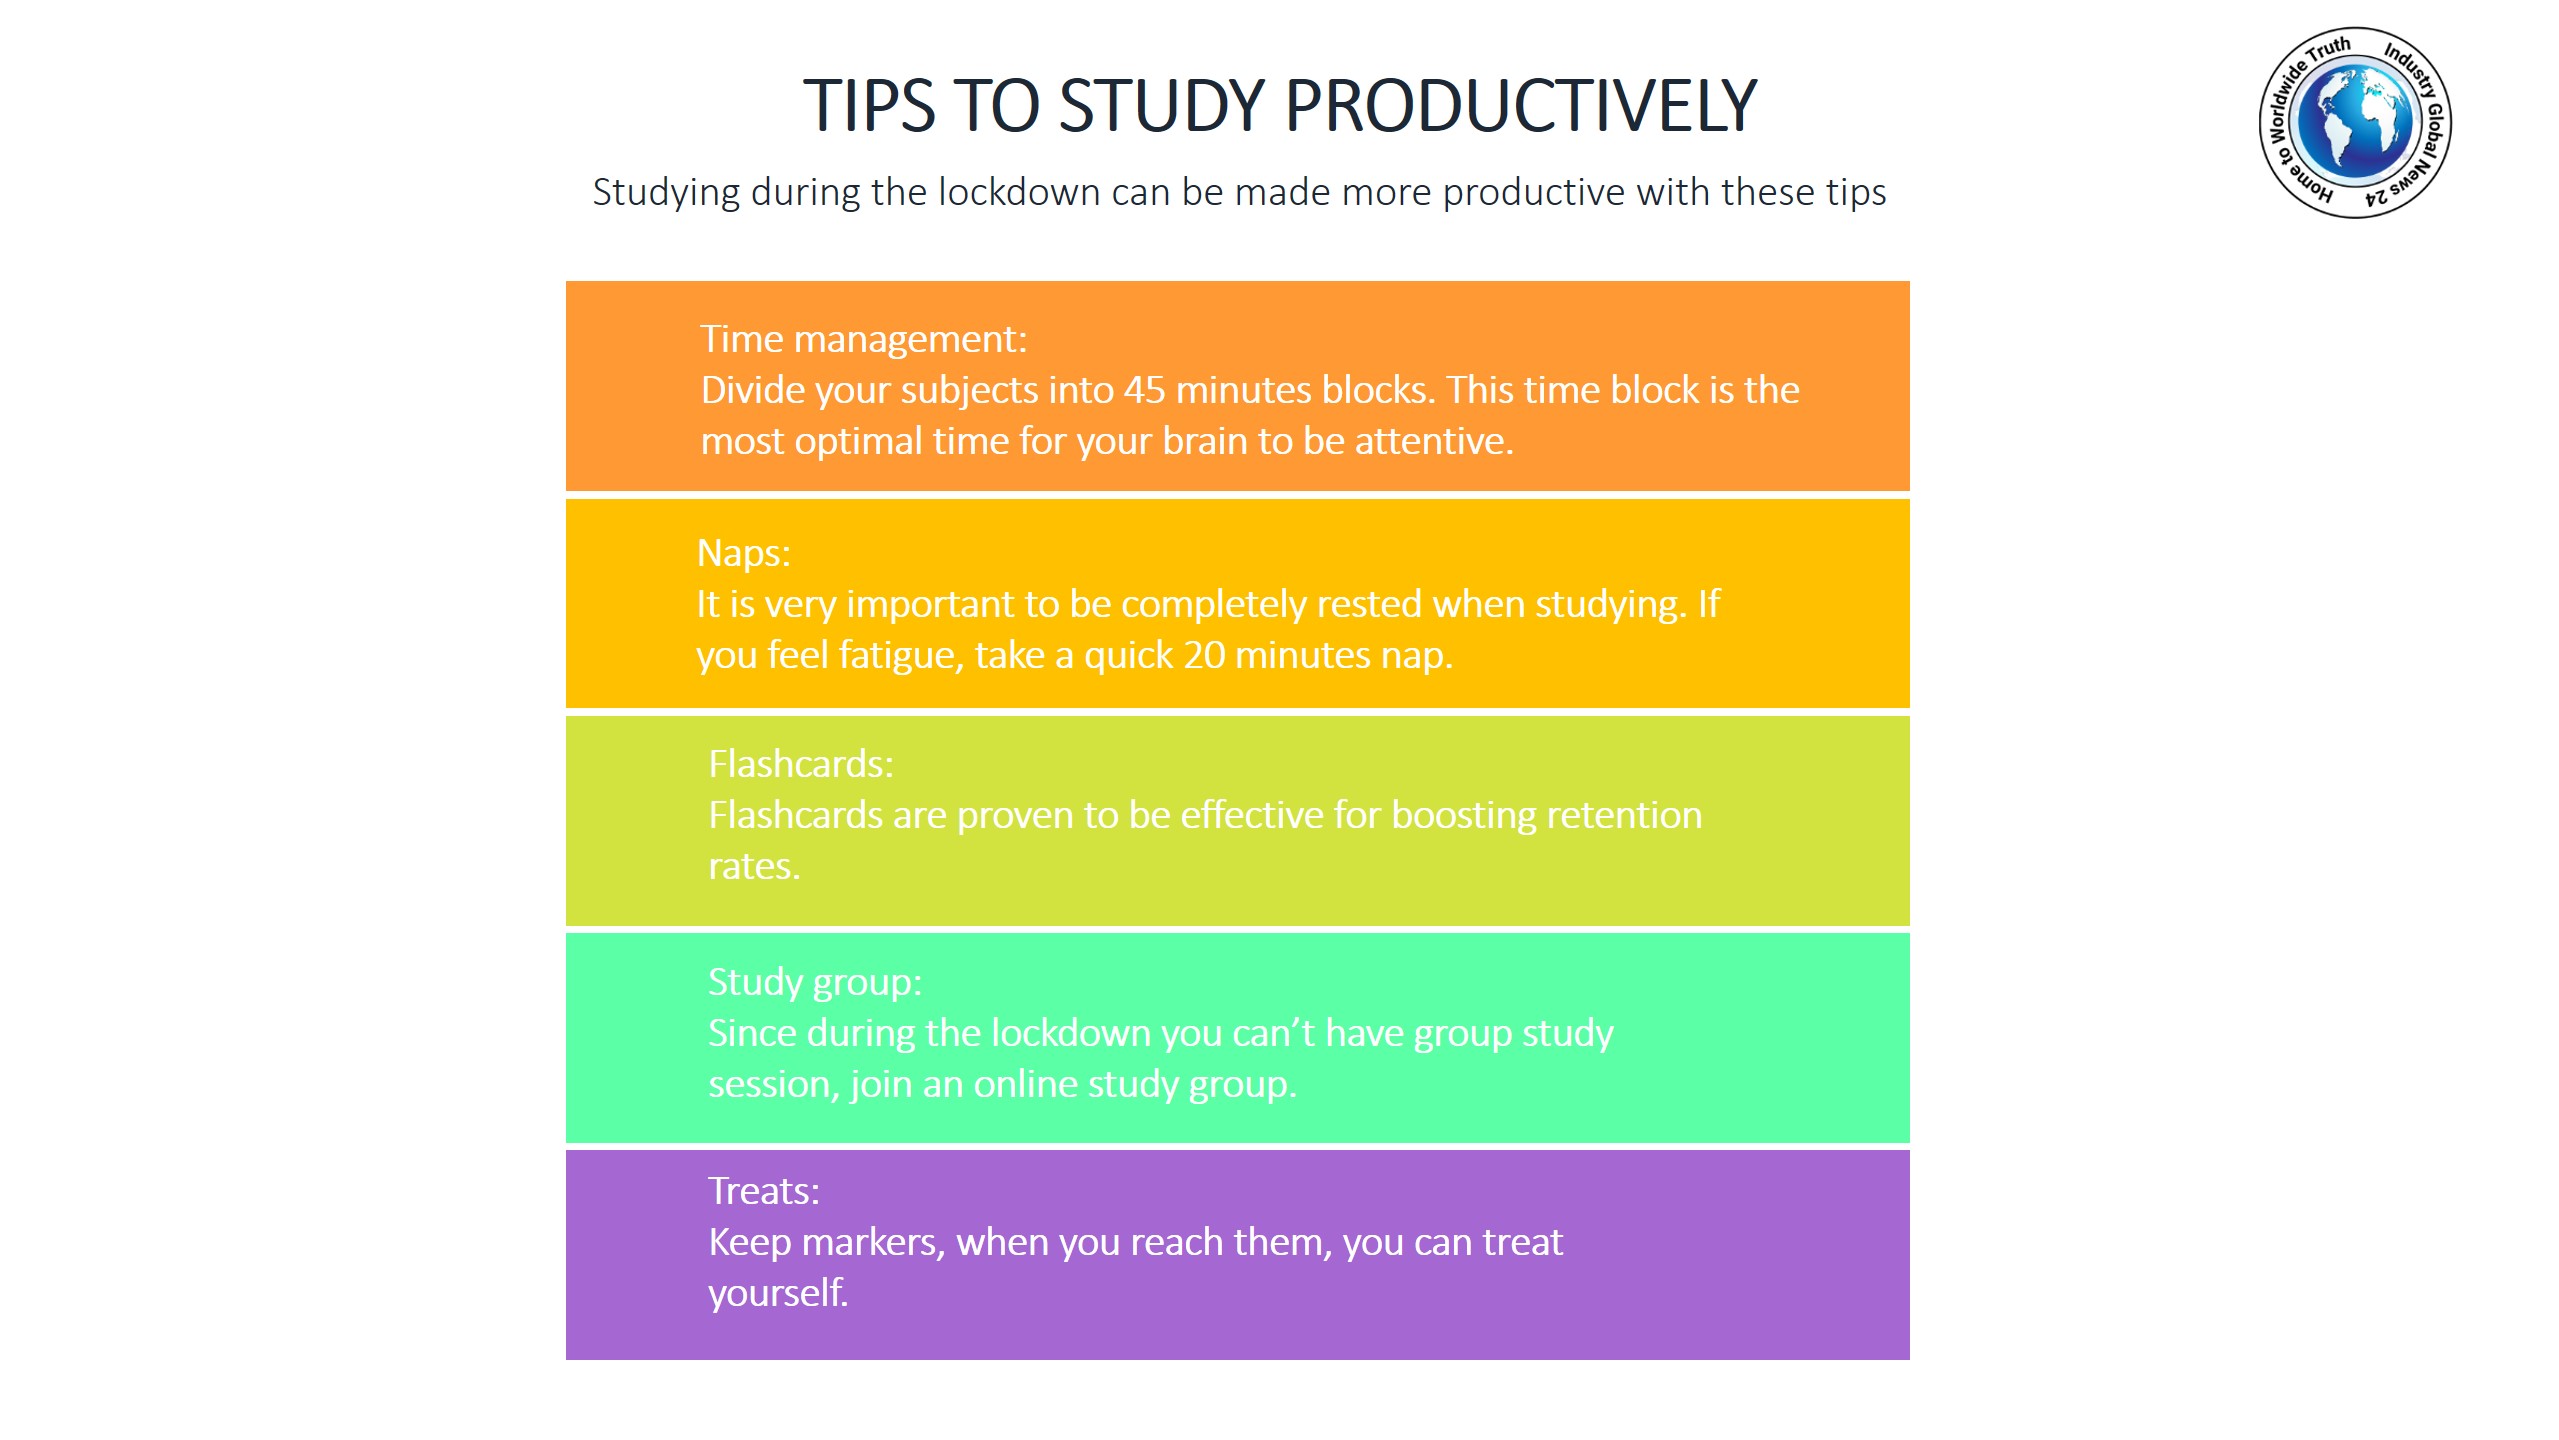 Tips to study productively